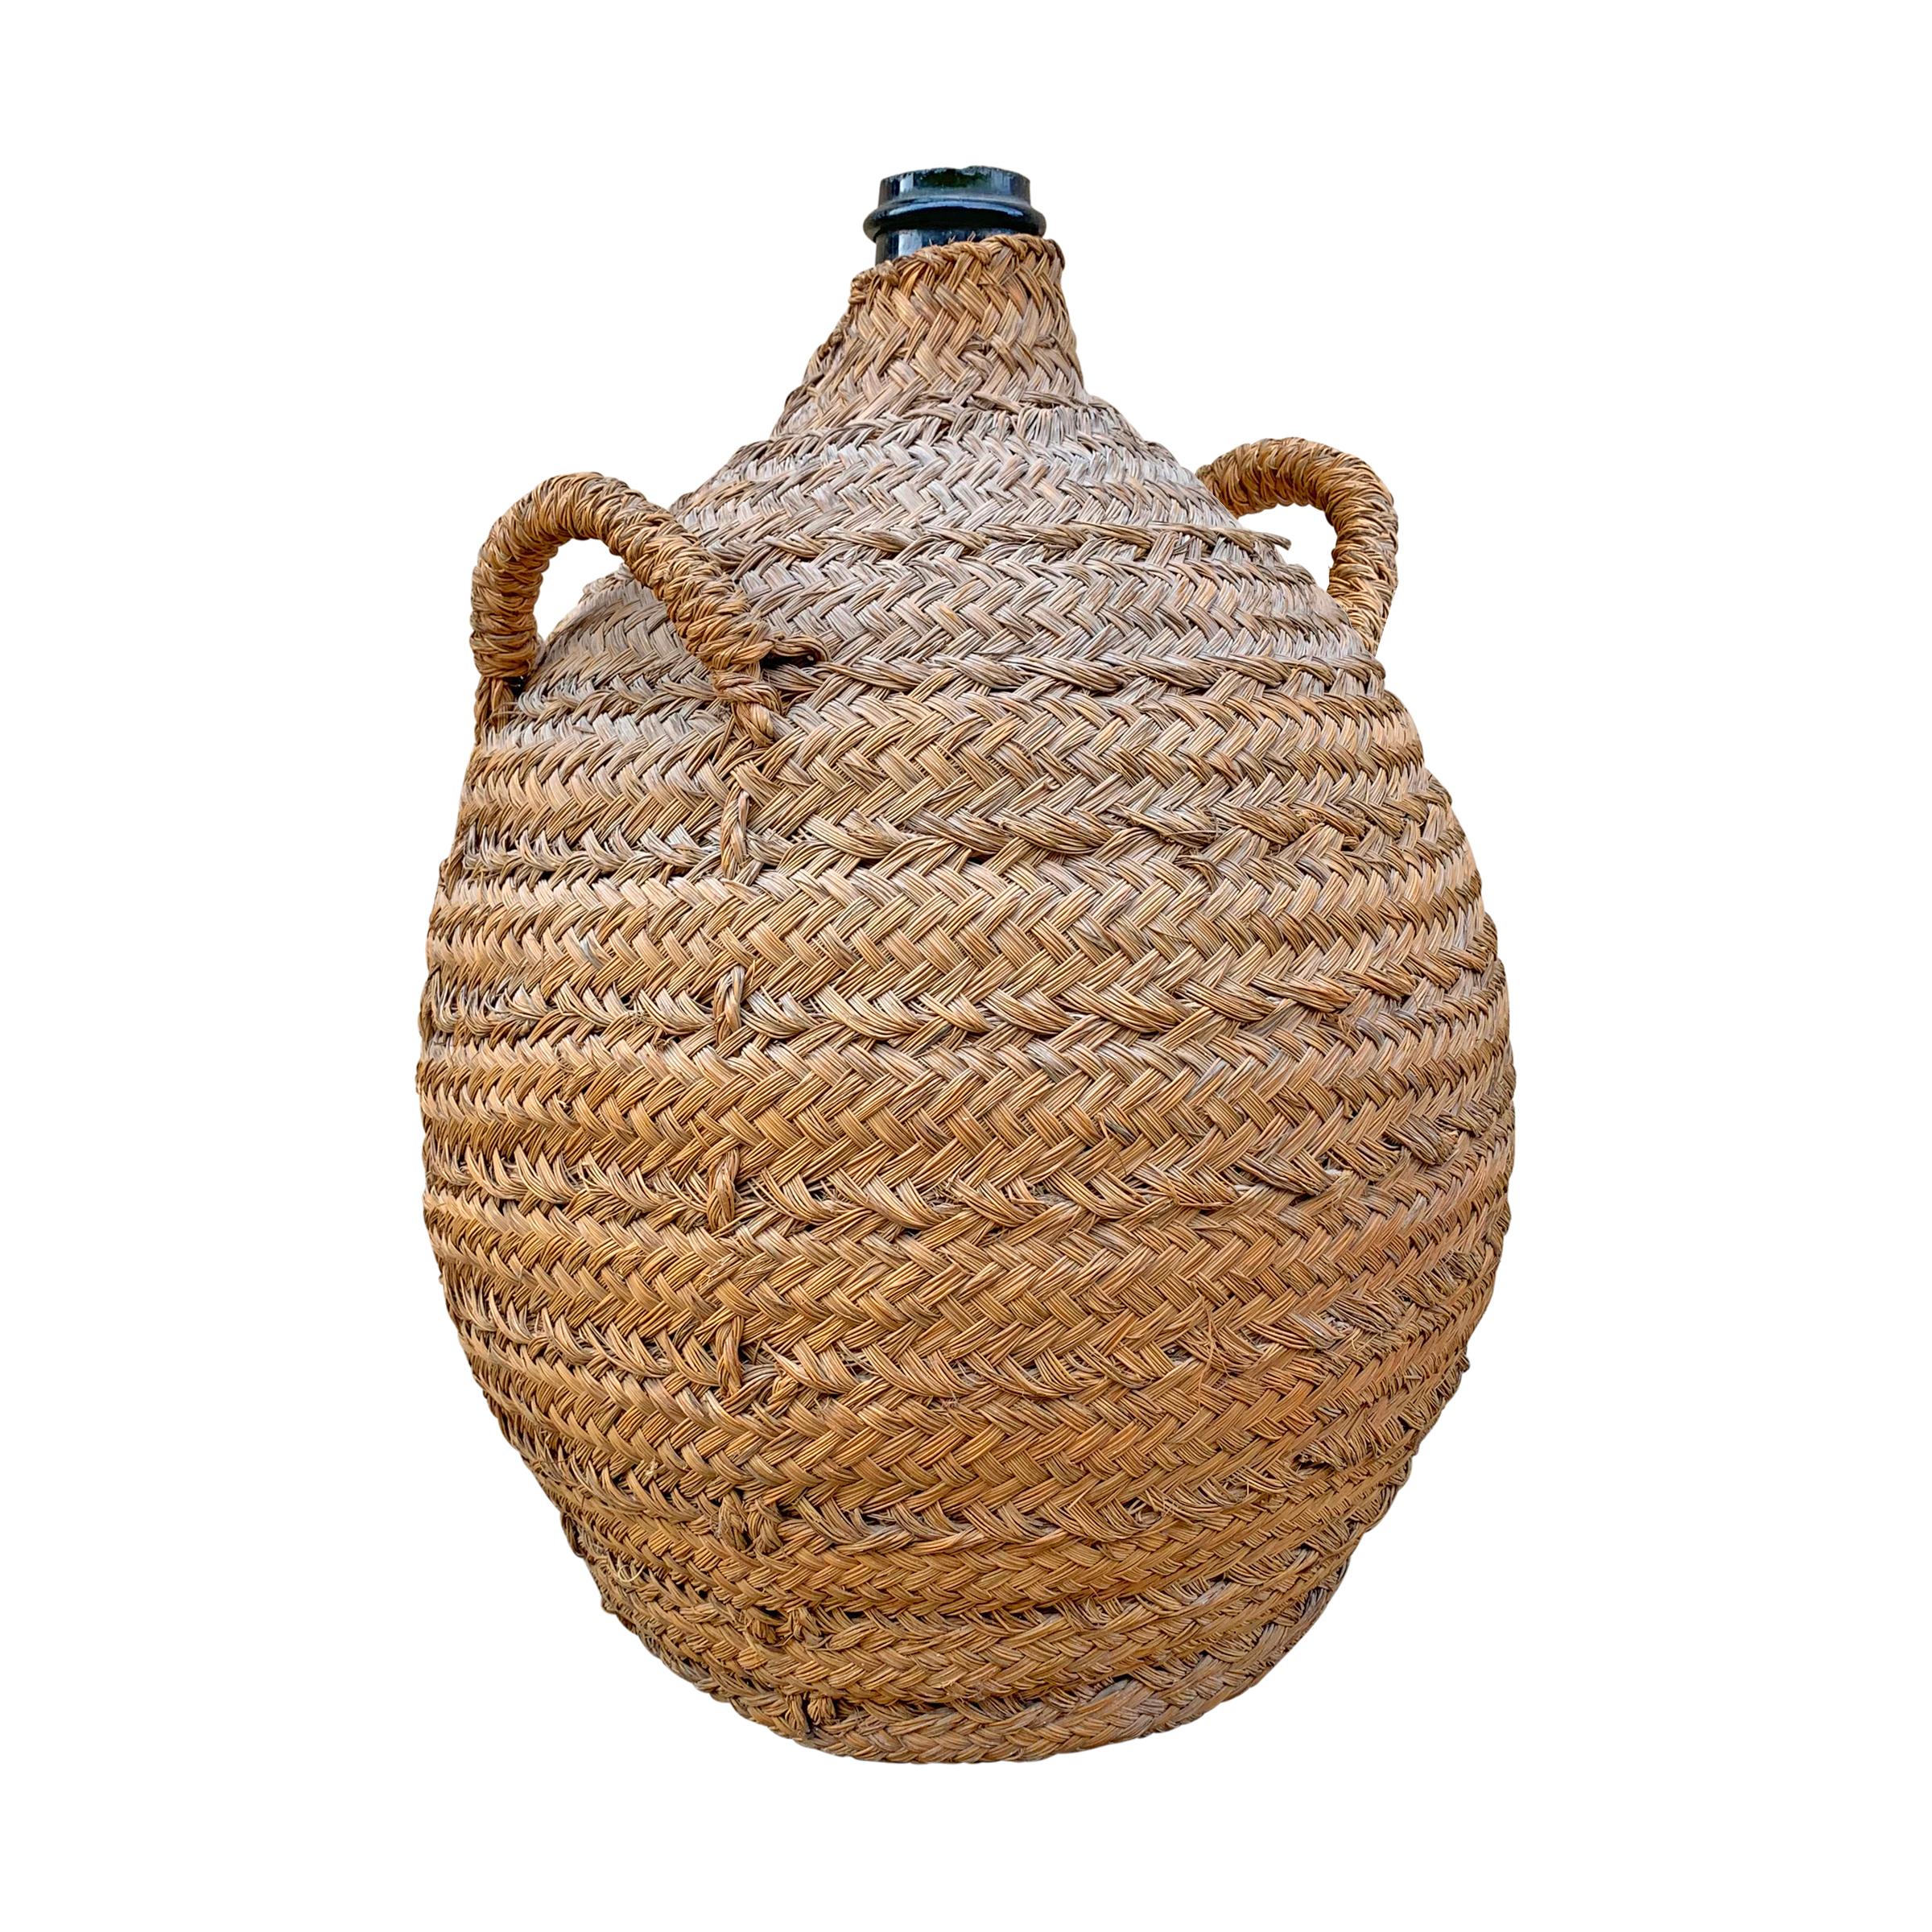 A handsome 19th century Italian hand blown green glass wine jar covered in a handwoven wicker basket to protect from bumps and bruises.